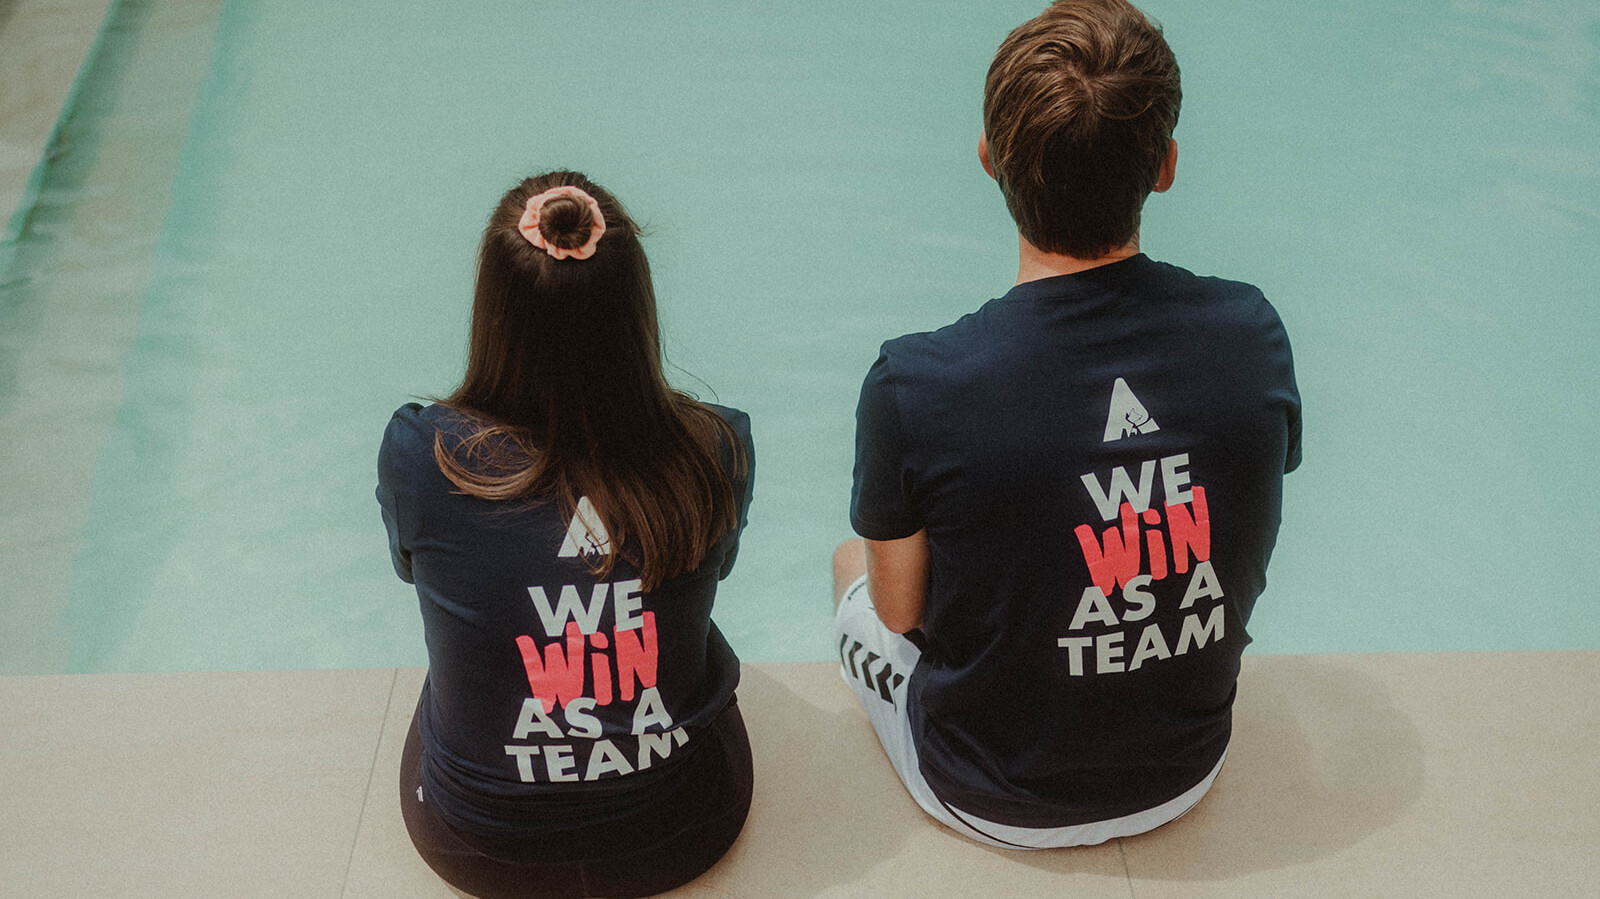 2 seated people from behind with "We win as a team" on the T-shirt © Alissa Lüpke - www.alissa.luepke.us